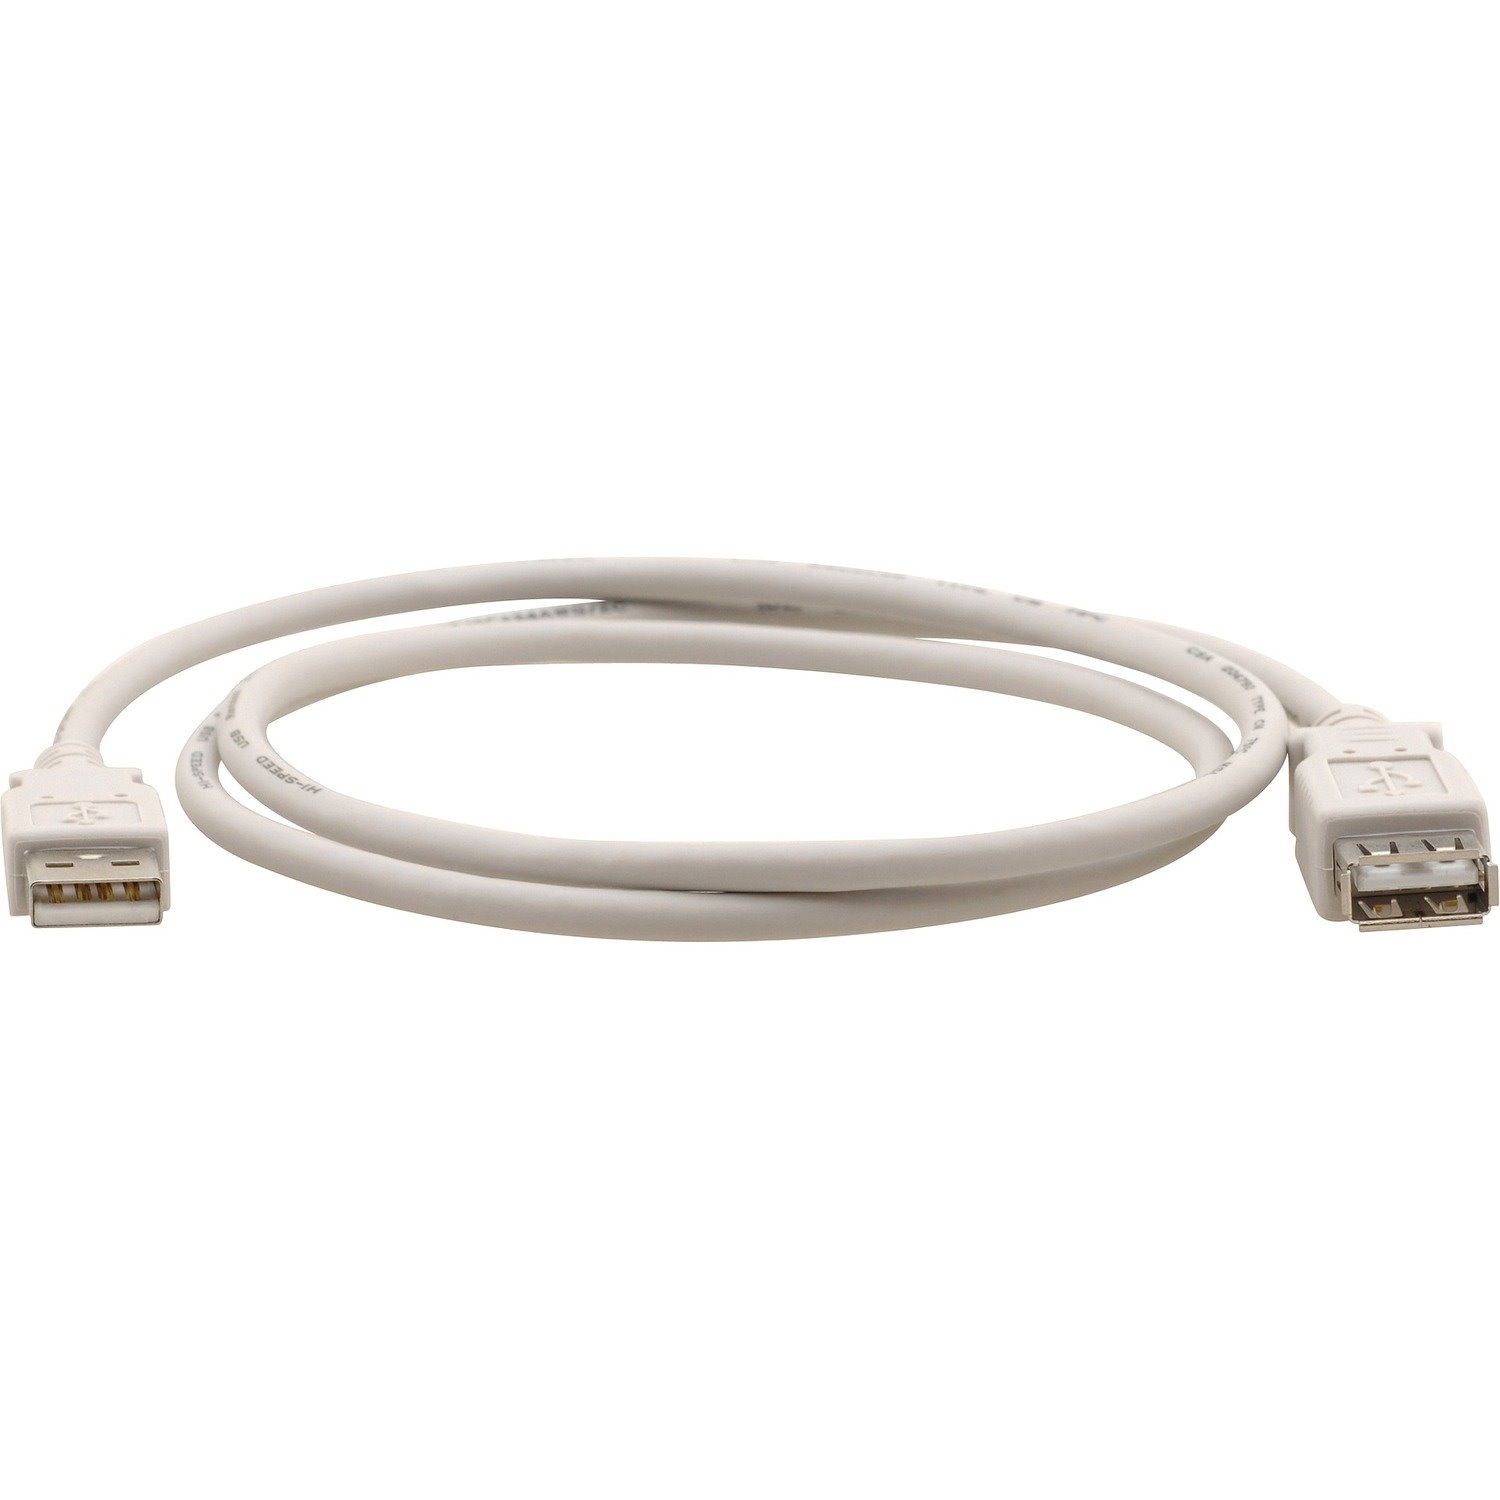 Kramer USB-A 2.0 Extention Cable